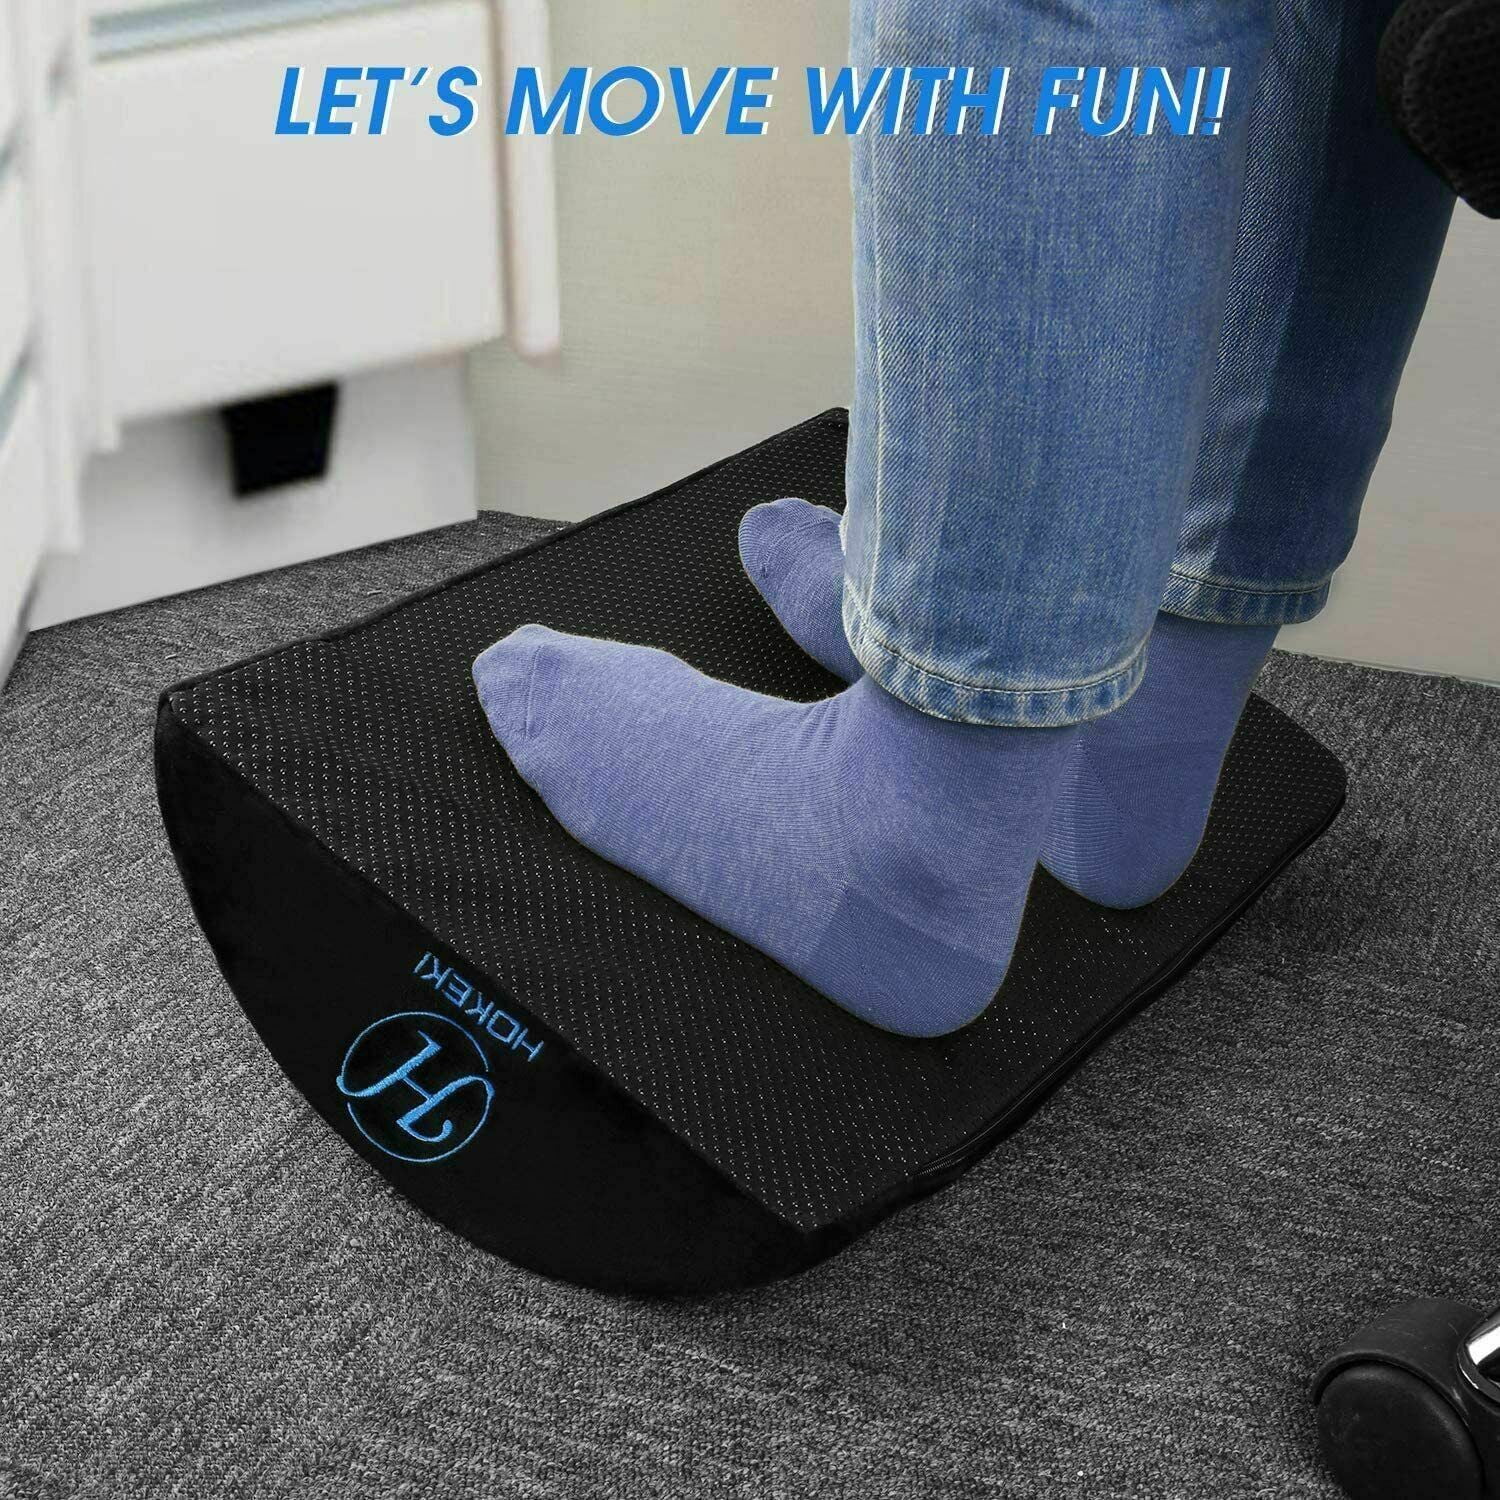 Everlasting Comfort Foot Rest for Under Desk - Kick Up Your Feet, Improve Circulation - Work from Home Memory Foam Footrest Pillow - Foot Stool for